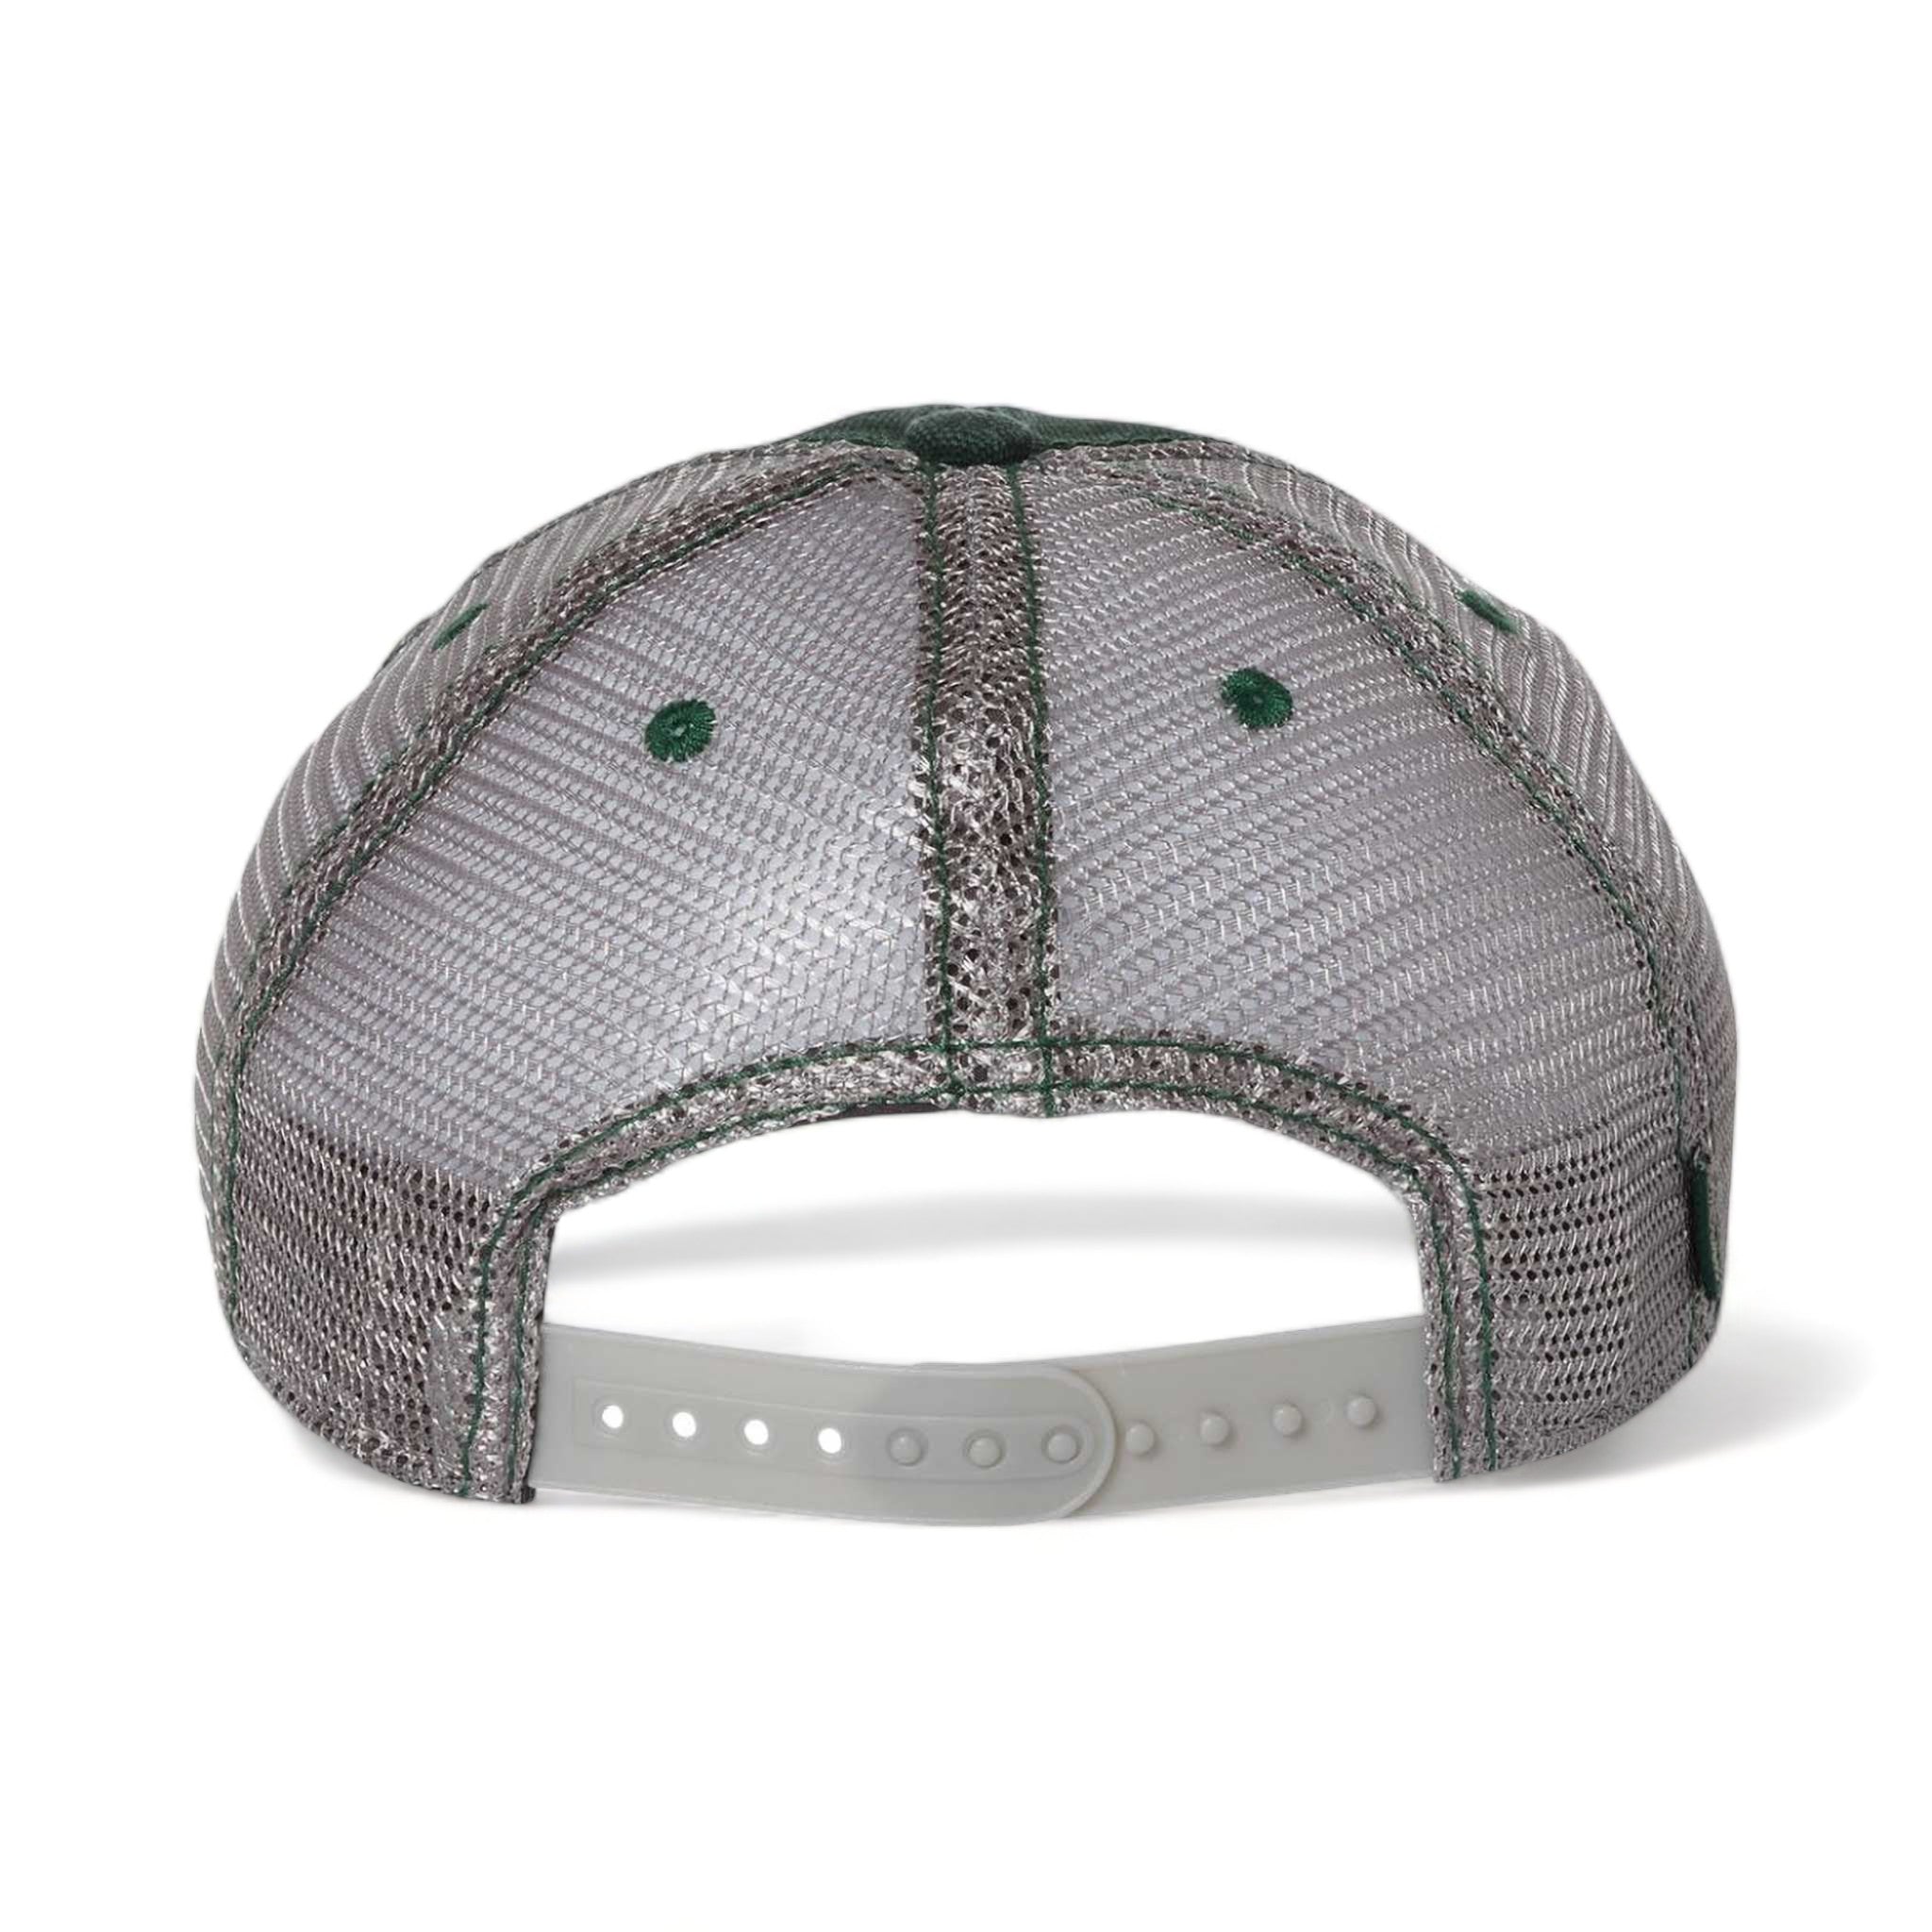 Back view of LEGACY DTA custom hat in dark green and grey